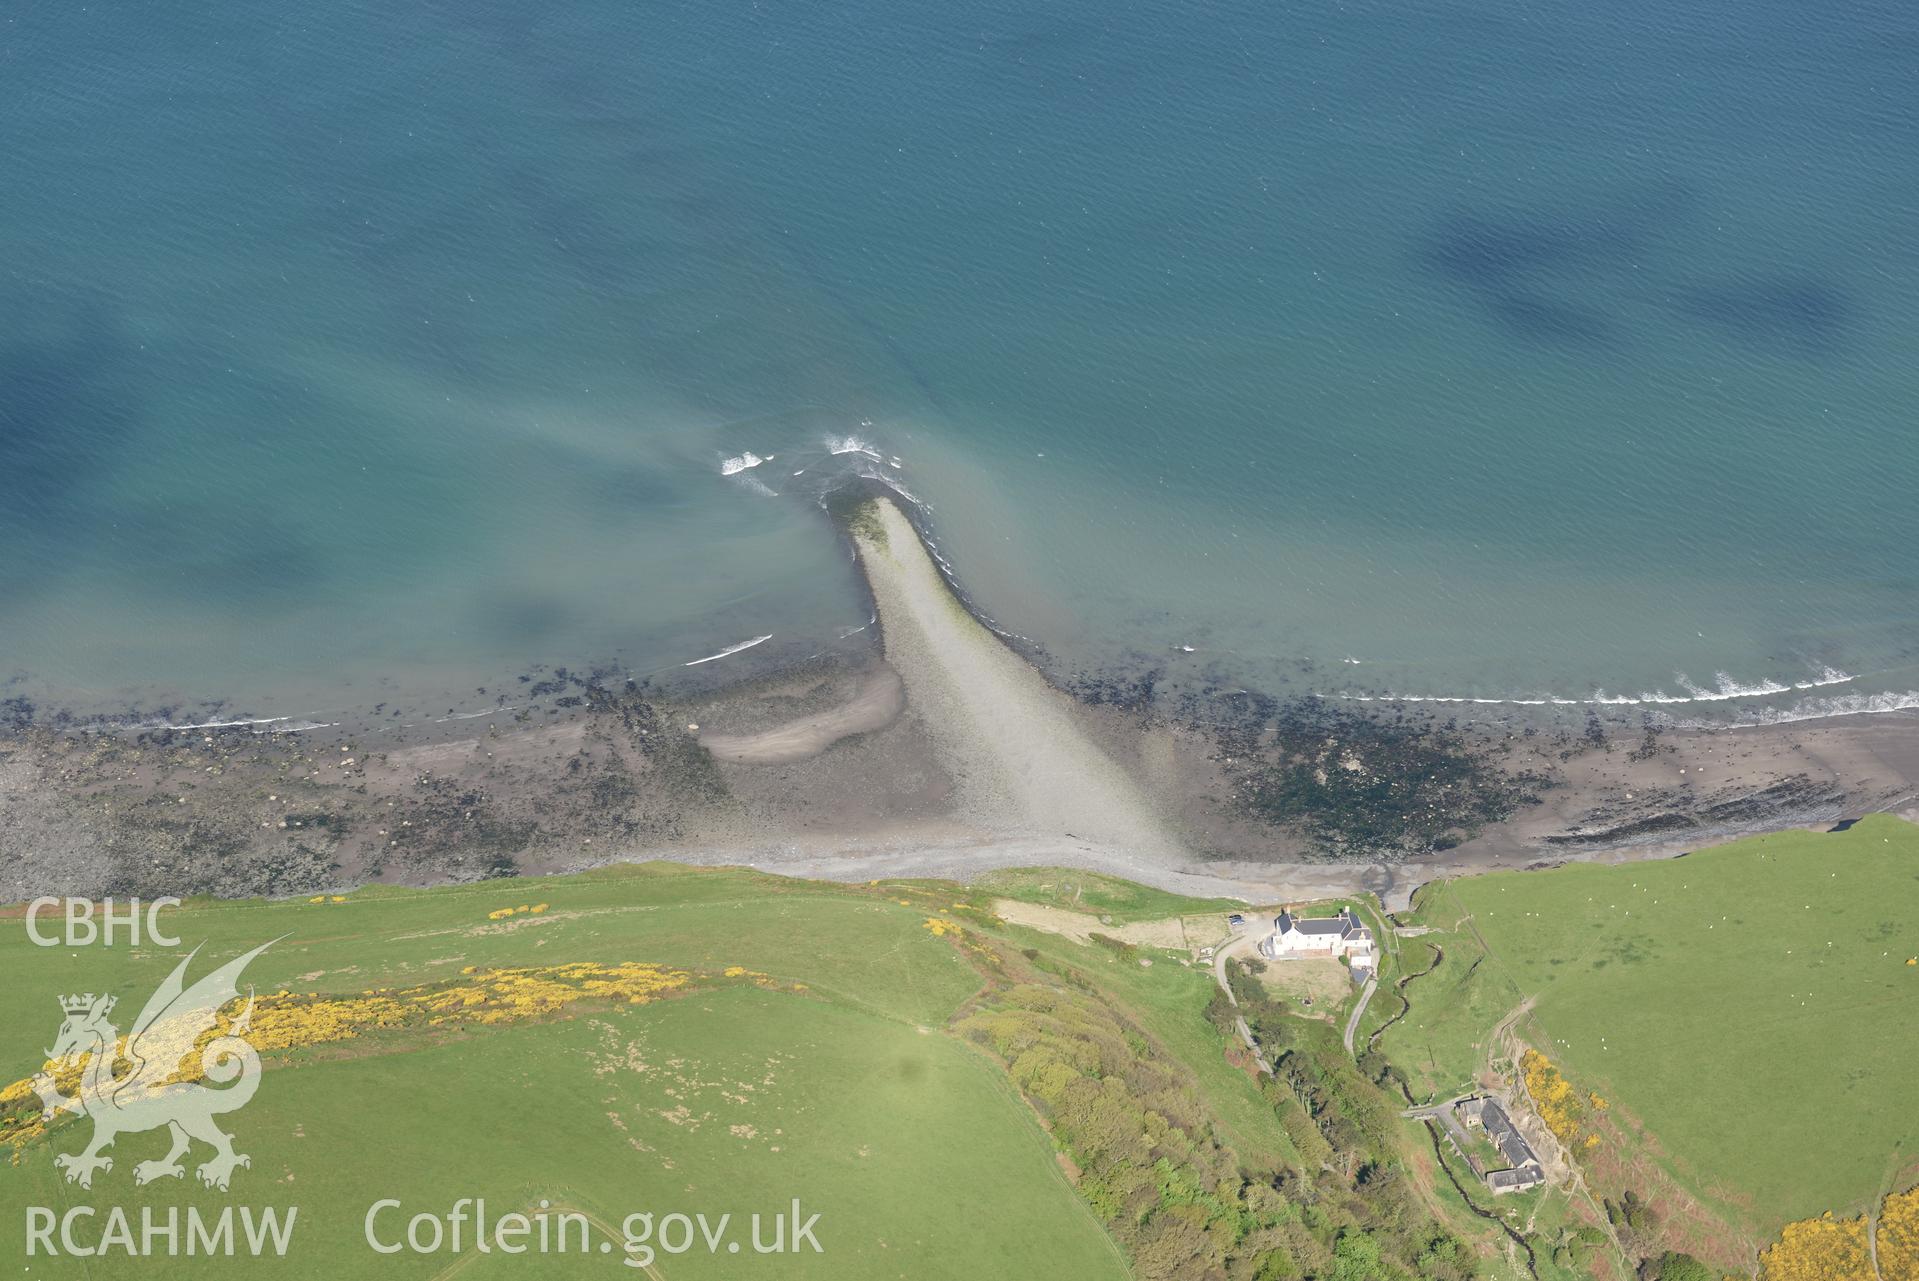 Aerial photography of Sarn Gynfelyn and Wallog taken on 3rd May 2017.  Baseline aerial reconnaissance survey for the CHERISH Project. ? Crown: CHERISH PROJECT 2017. Produced with EU funds through the Ireland Wales Co-operation Programme 2014-2020. All material made freely available through the Open Government Licence.